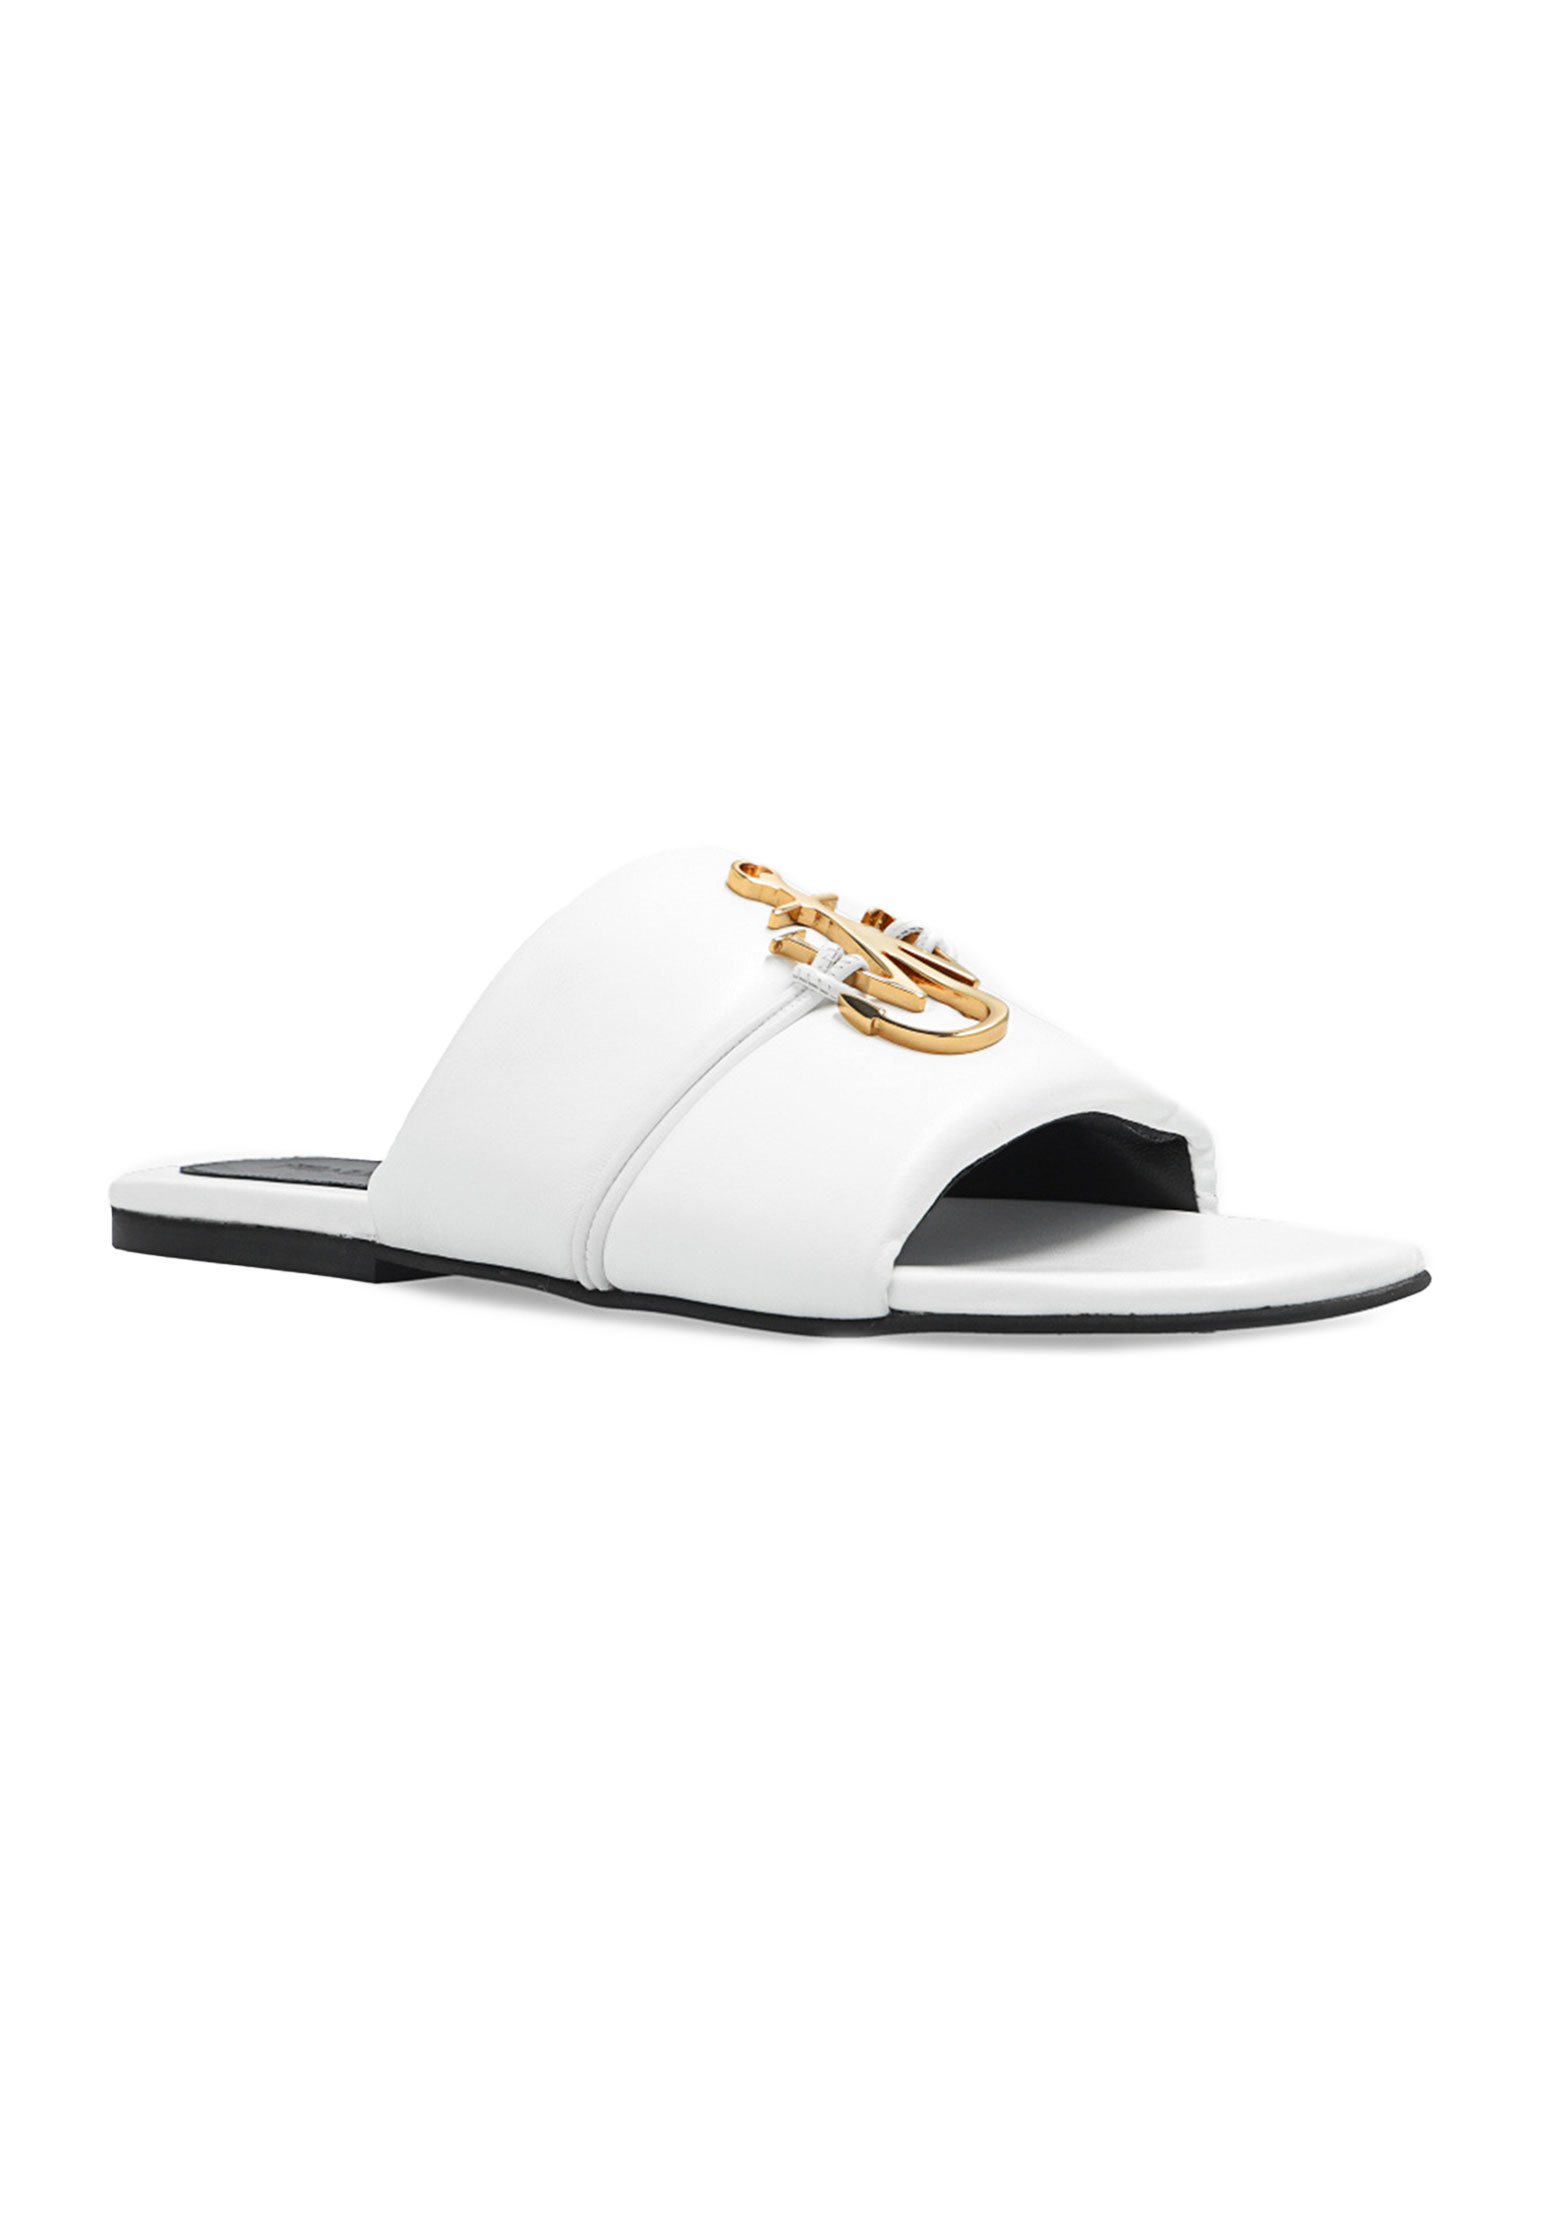 Slippers J.W. ANDERSON Color: white (Code: 1354) in online store Allure